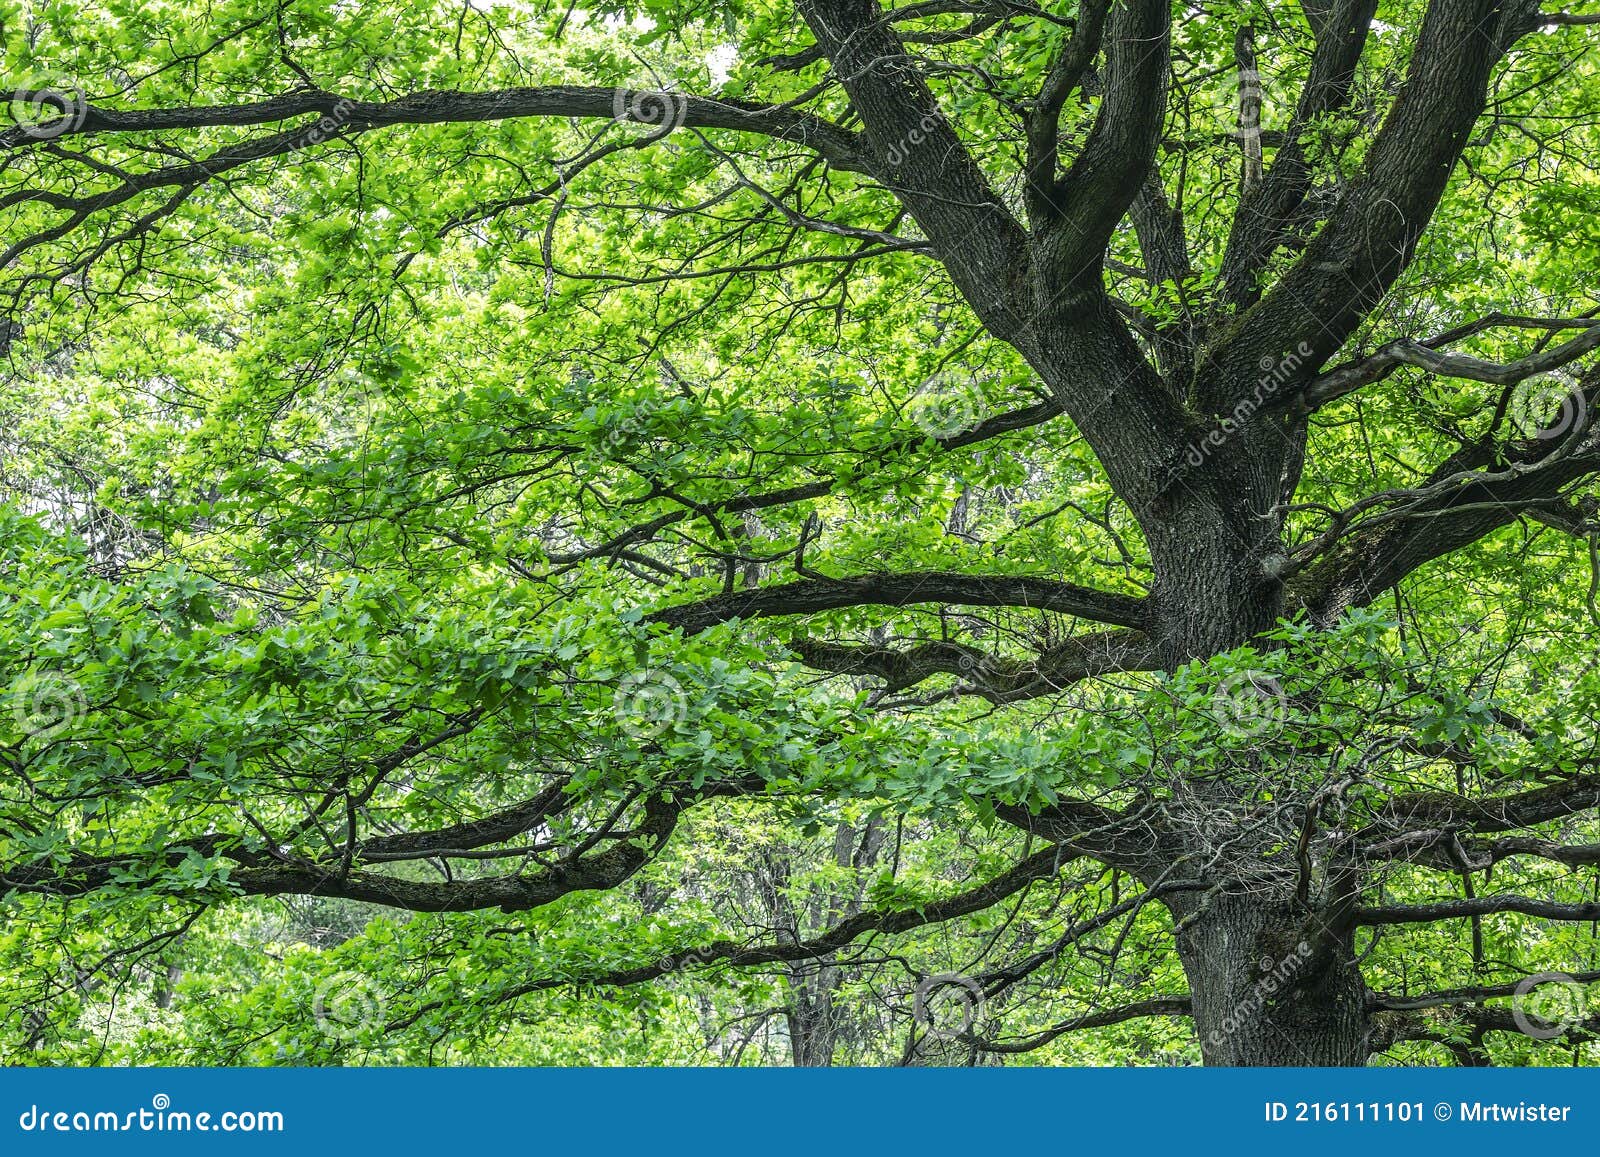 Old Big Tree with Green Lush Foliage. Nature Scenic Spring Landscape Stock Image - Image of leaves, beautiful: 216111101